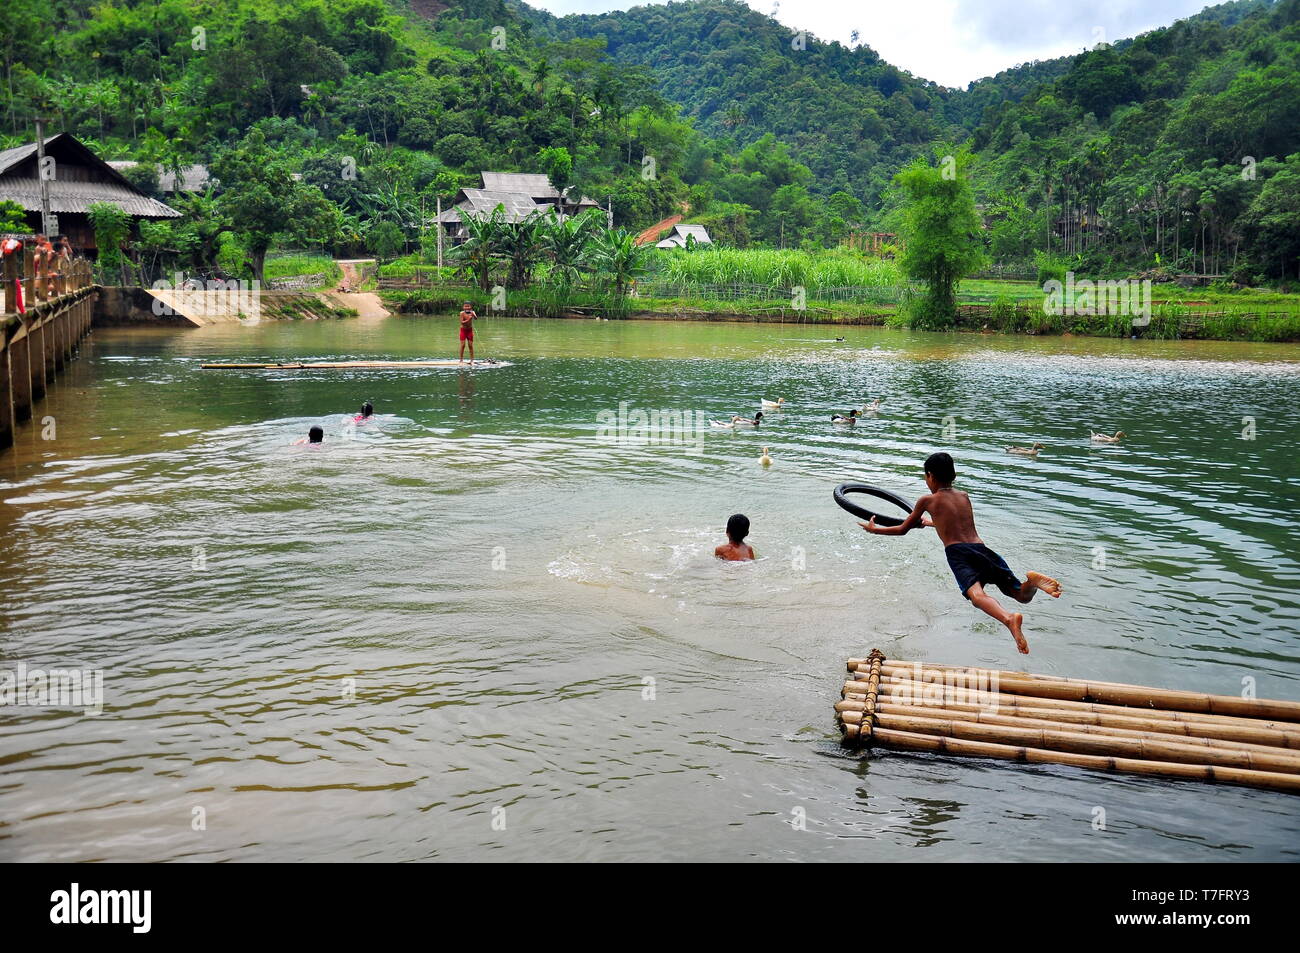 playing in the lake, Nua village, PuLuong, Thanh Hoa, VietNam Stock Photo